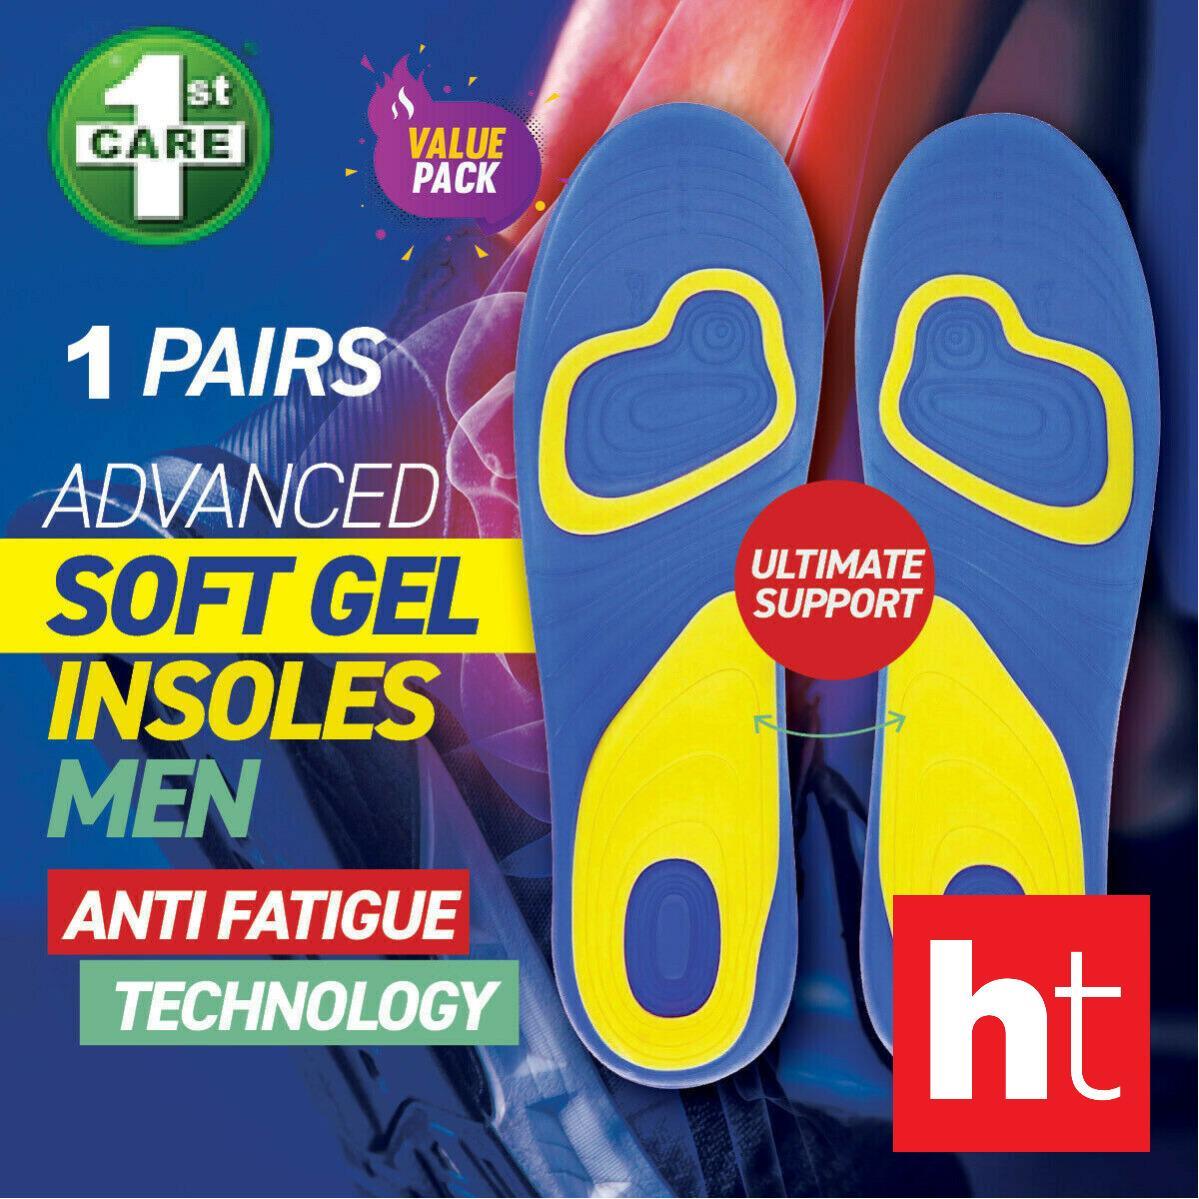 1st Care Extra Comfort Gel Insoles Ultimate Support Mens